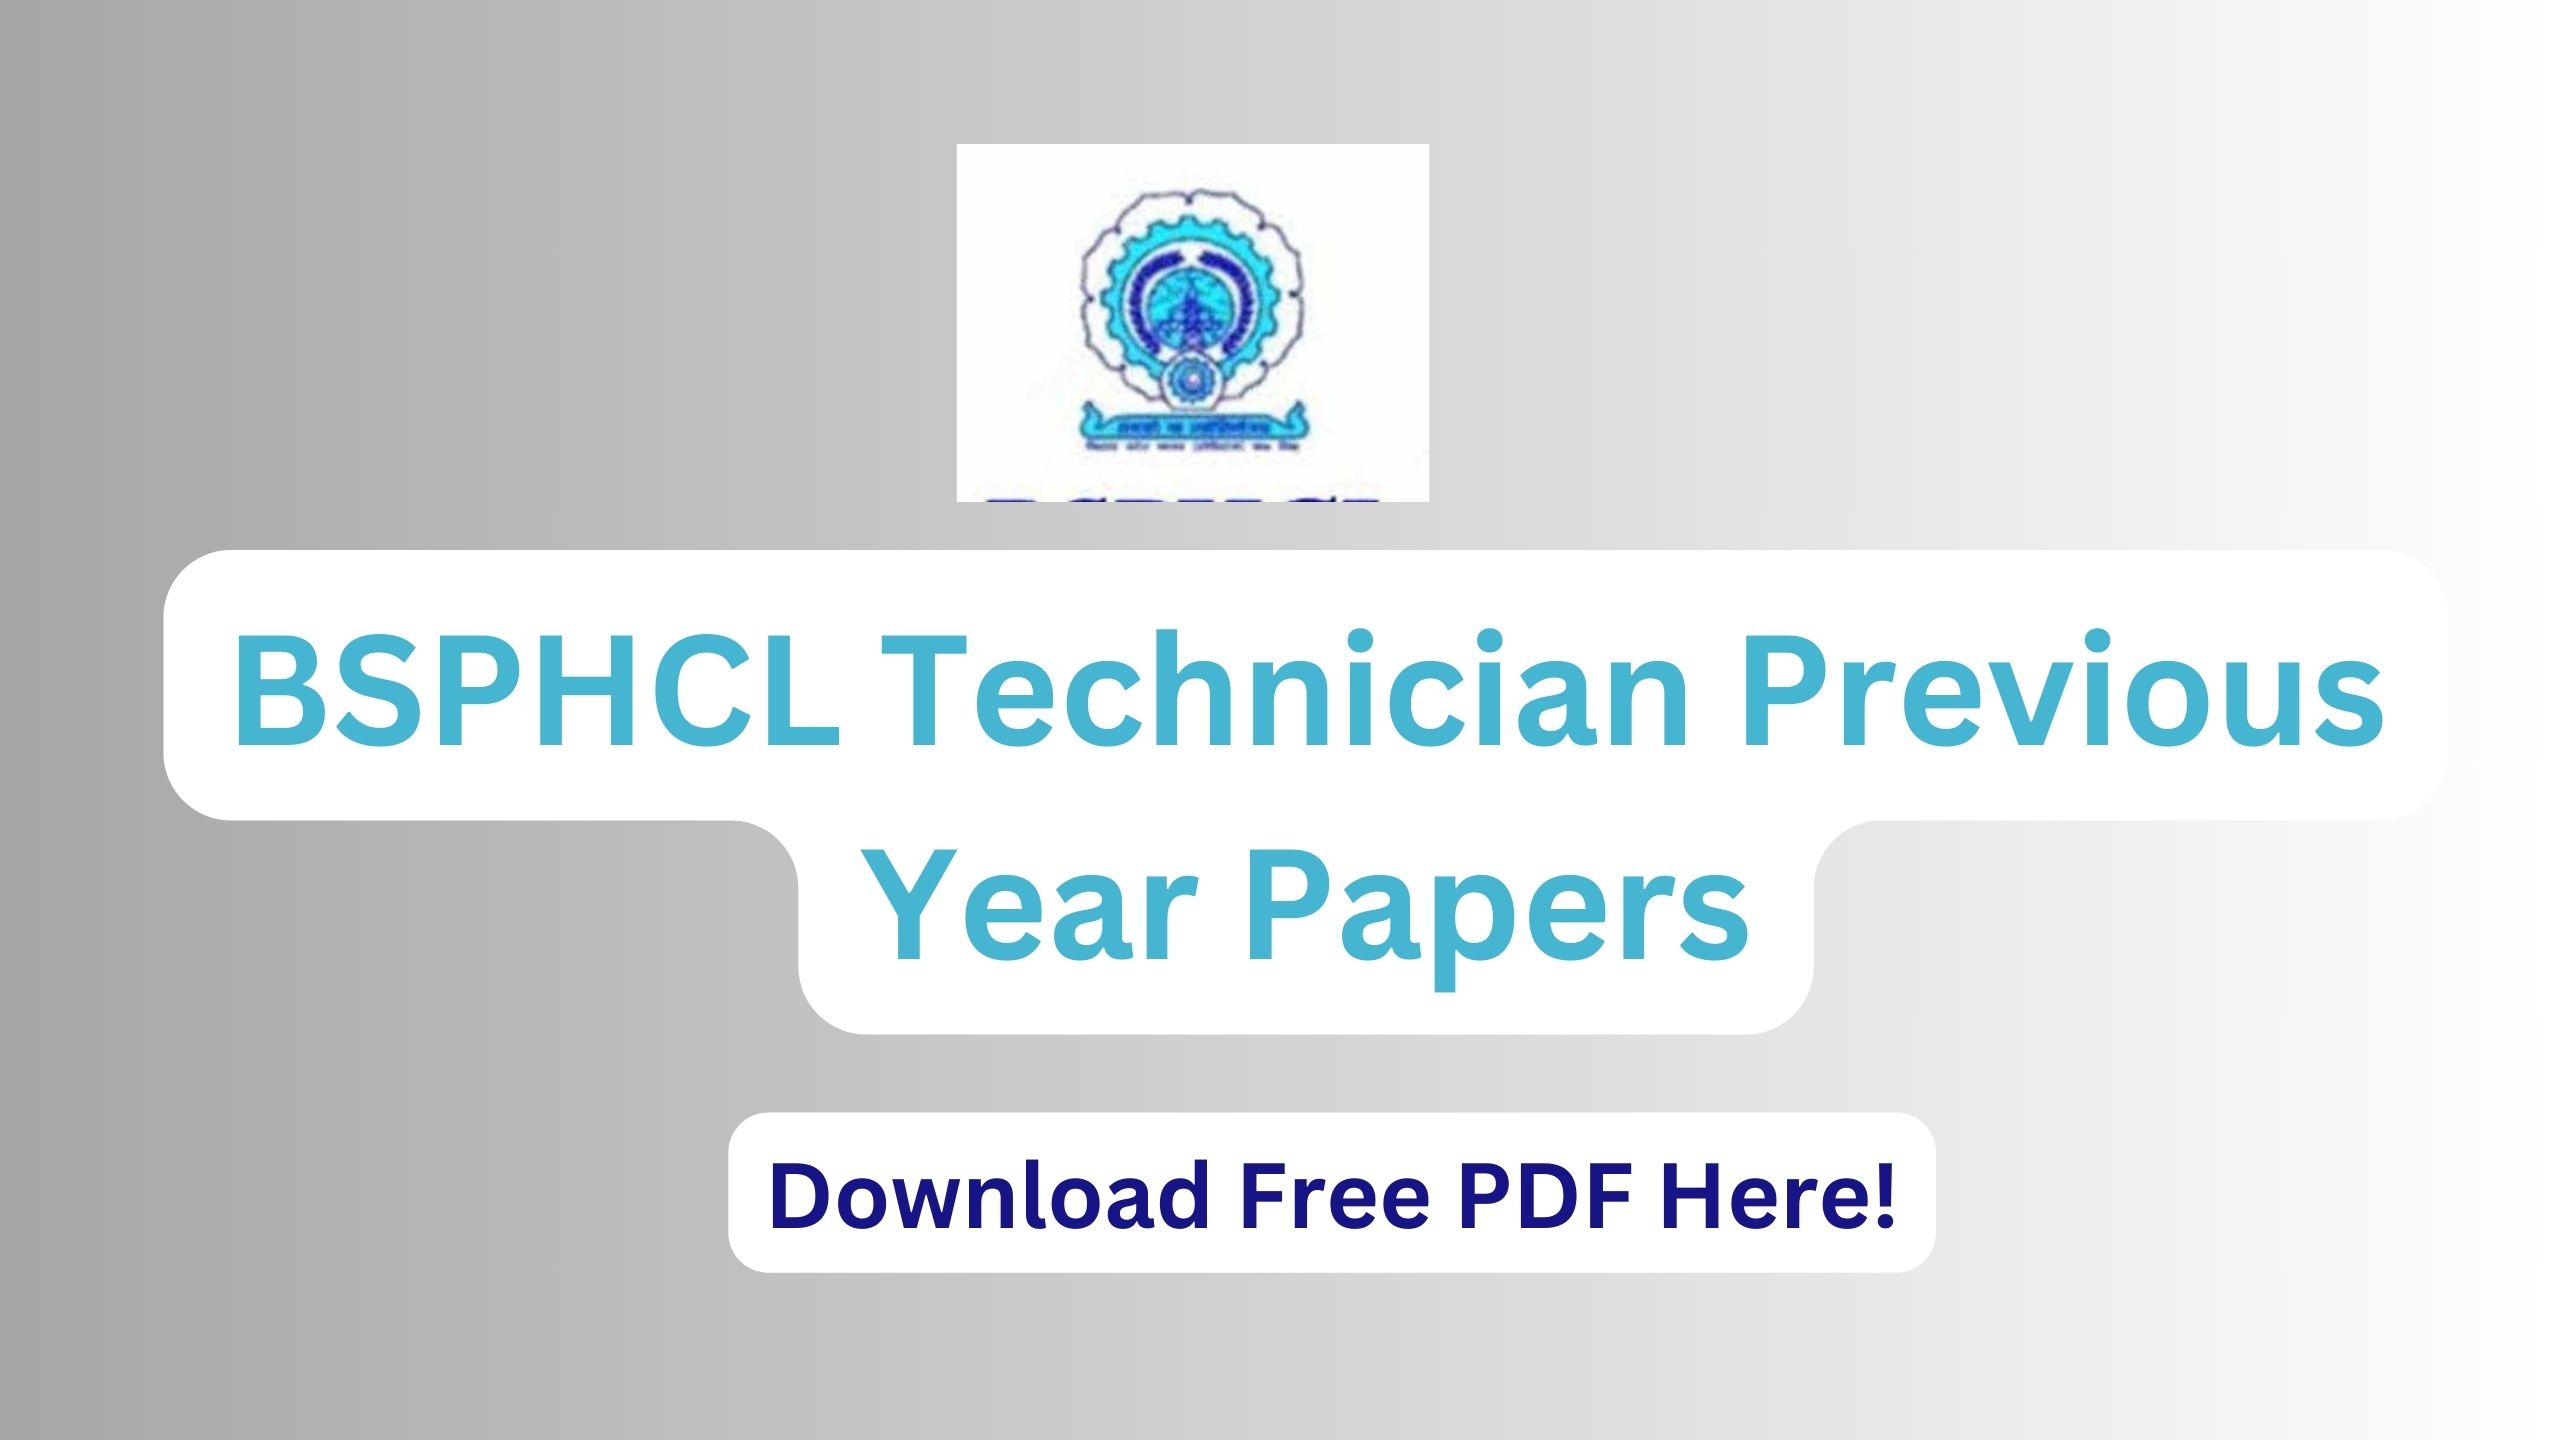 BSPHCL Technician Previous Year Papers, Download Free PDF!